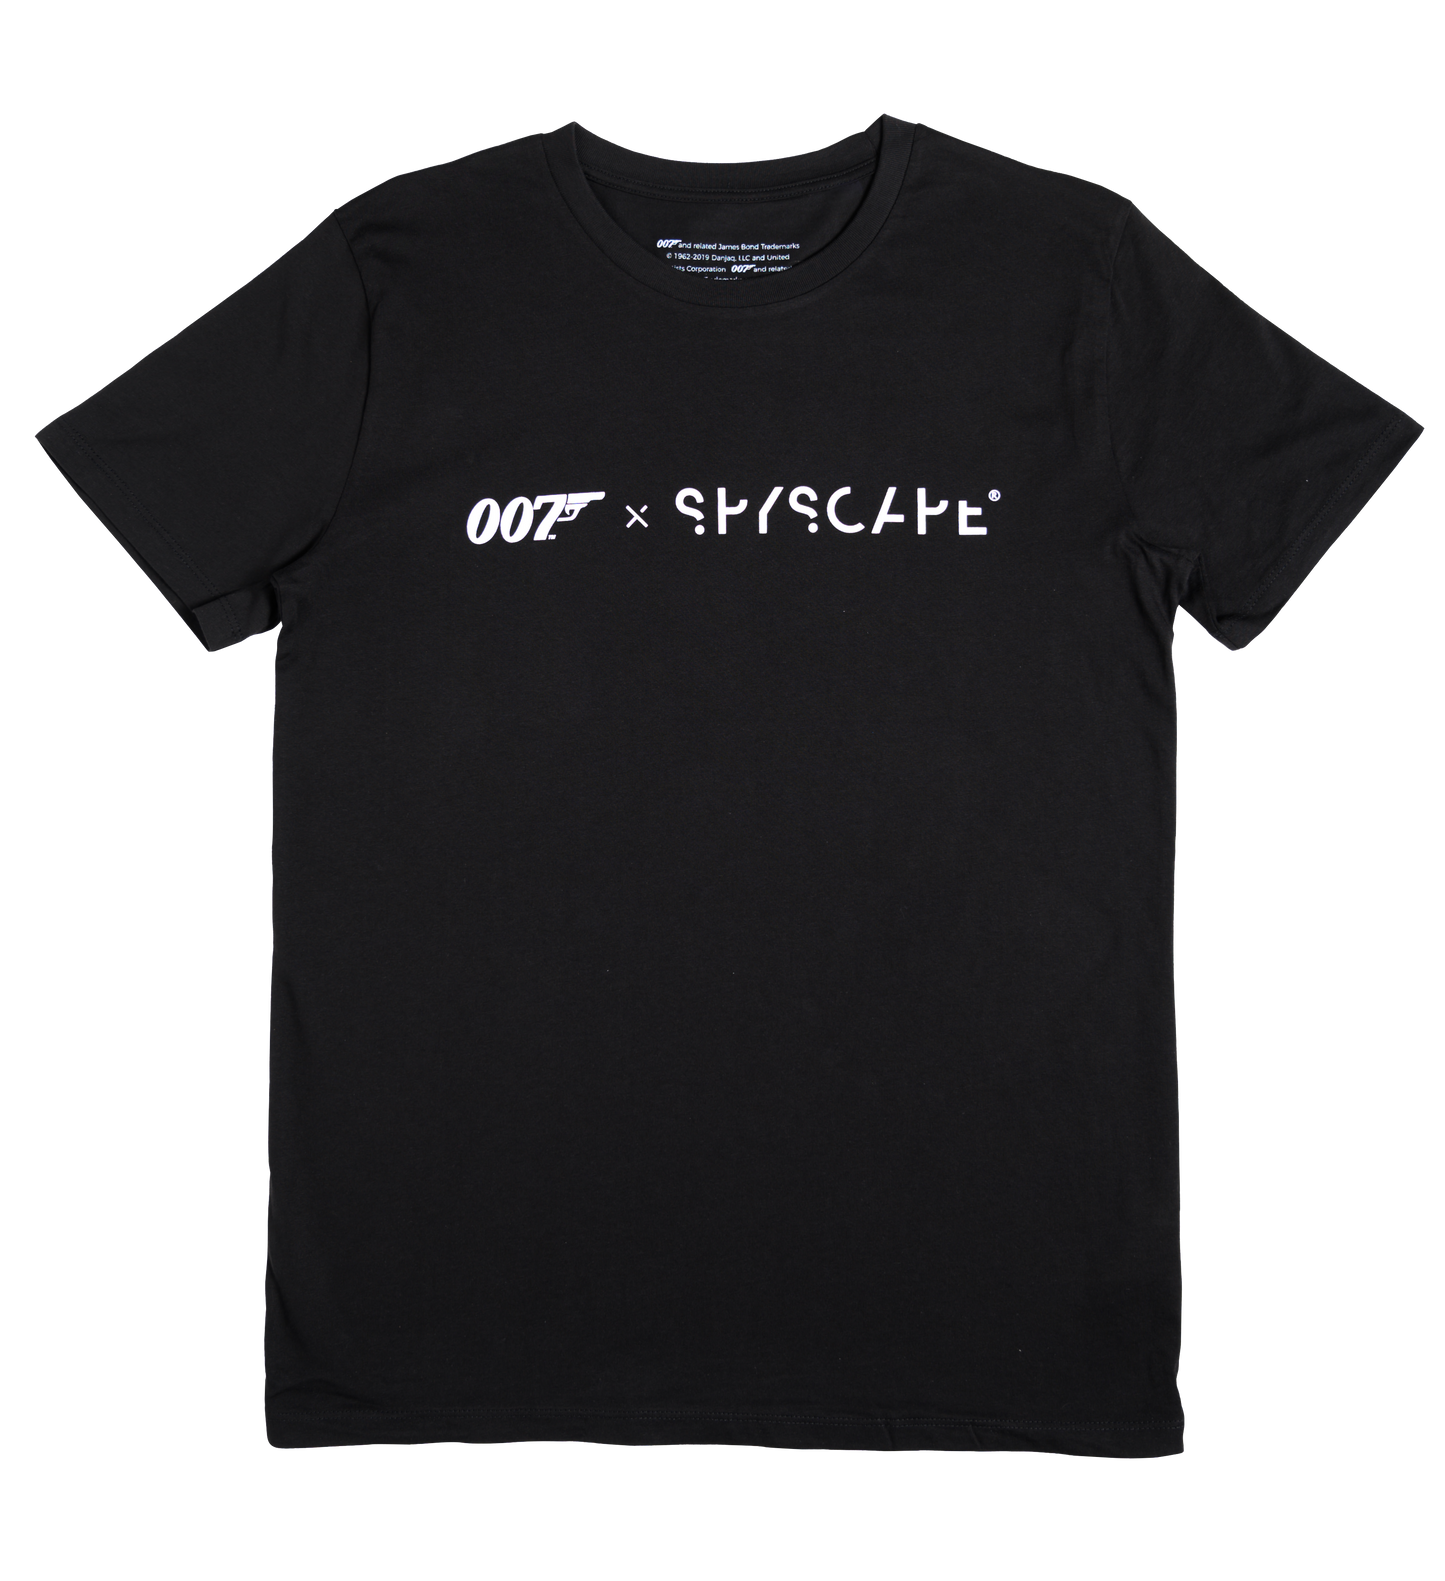 007 x SPYSCAPE T-Shirt - Front view of black 007 x Spyscape T-shirt Small 